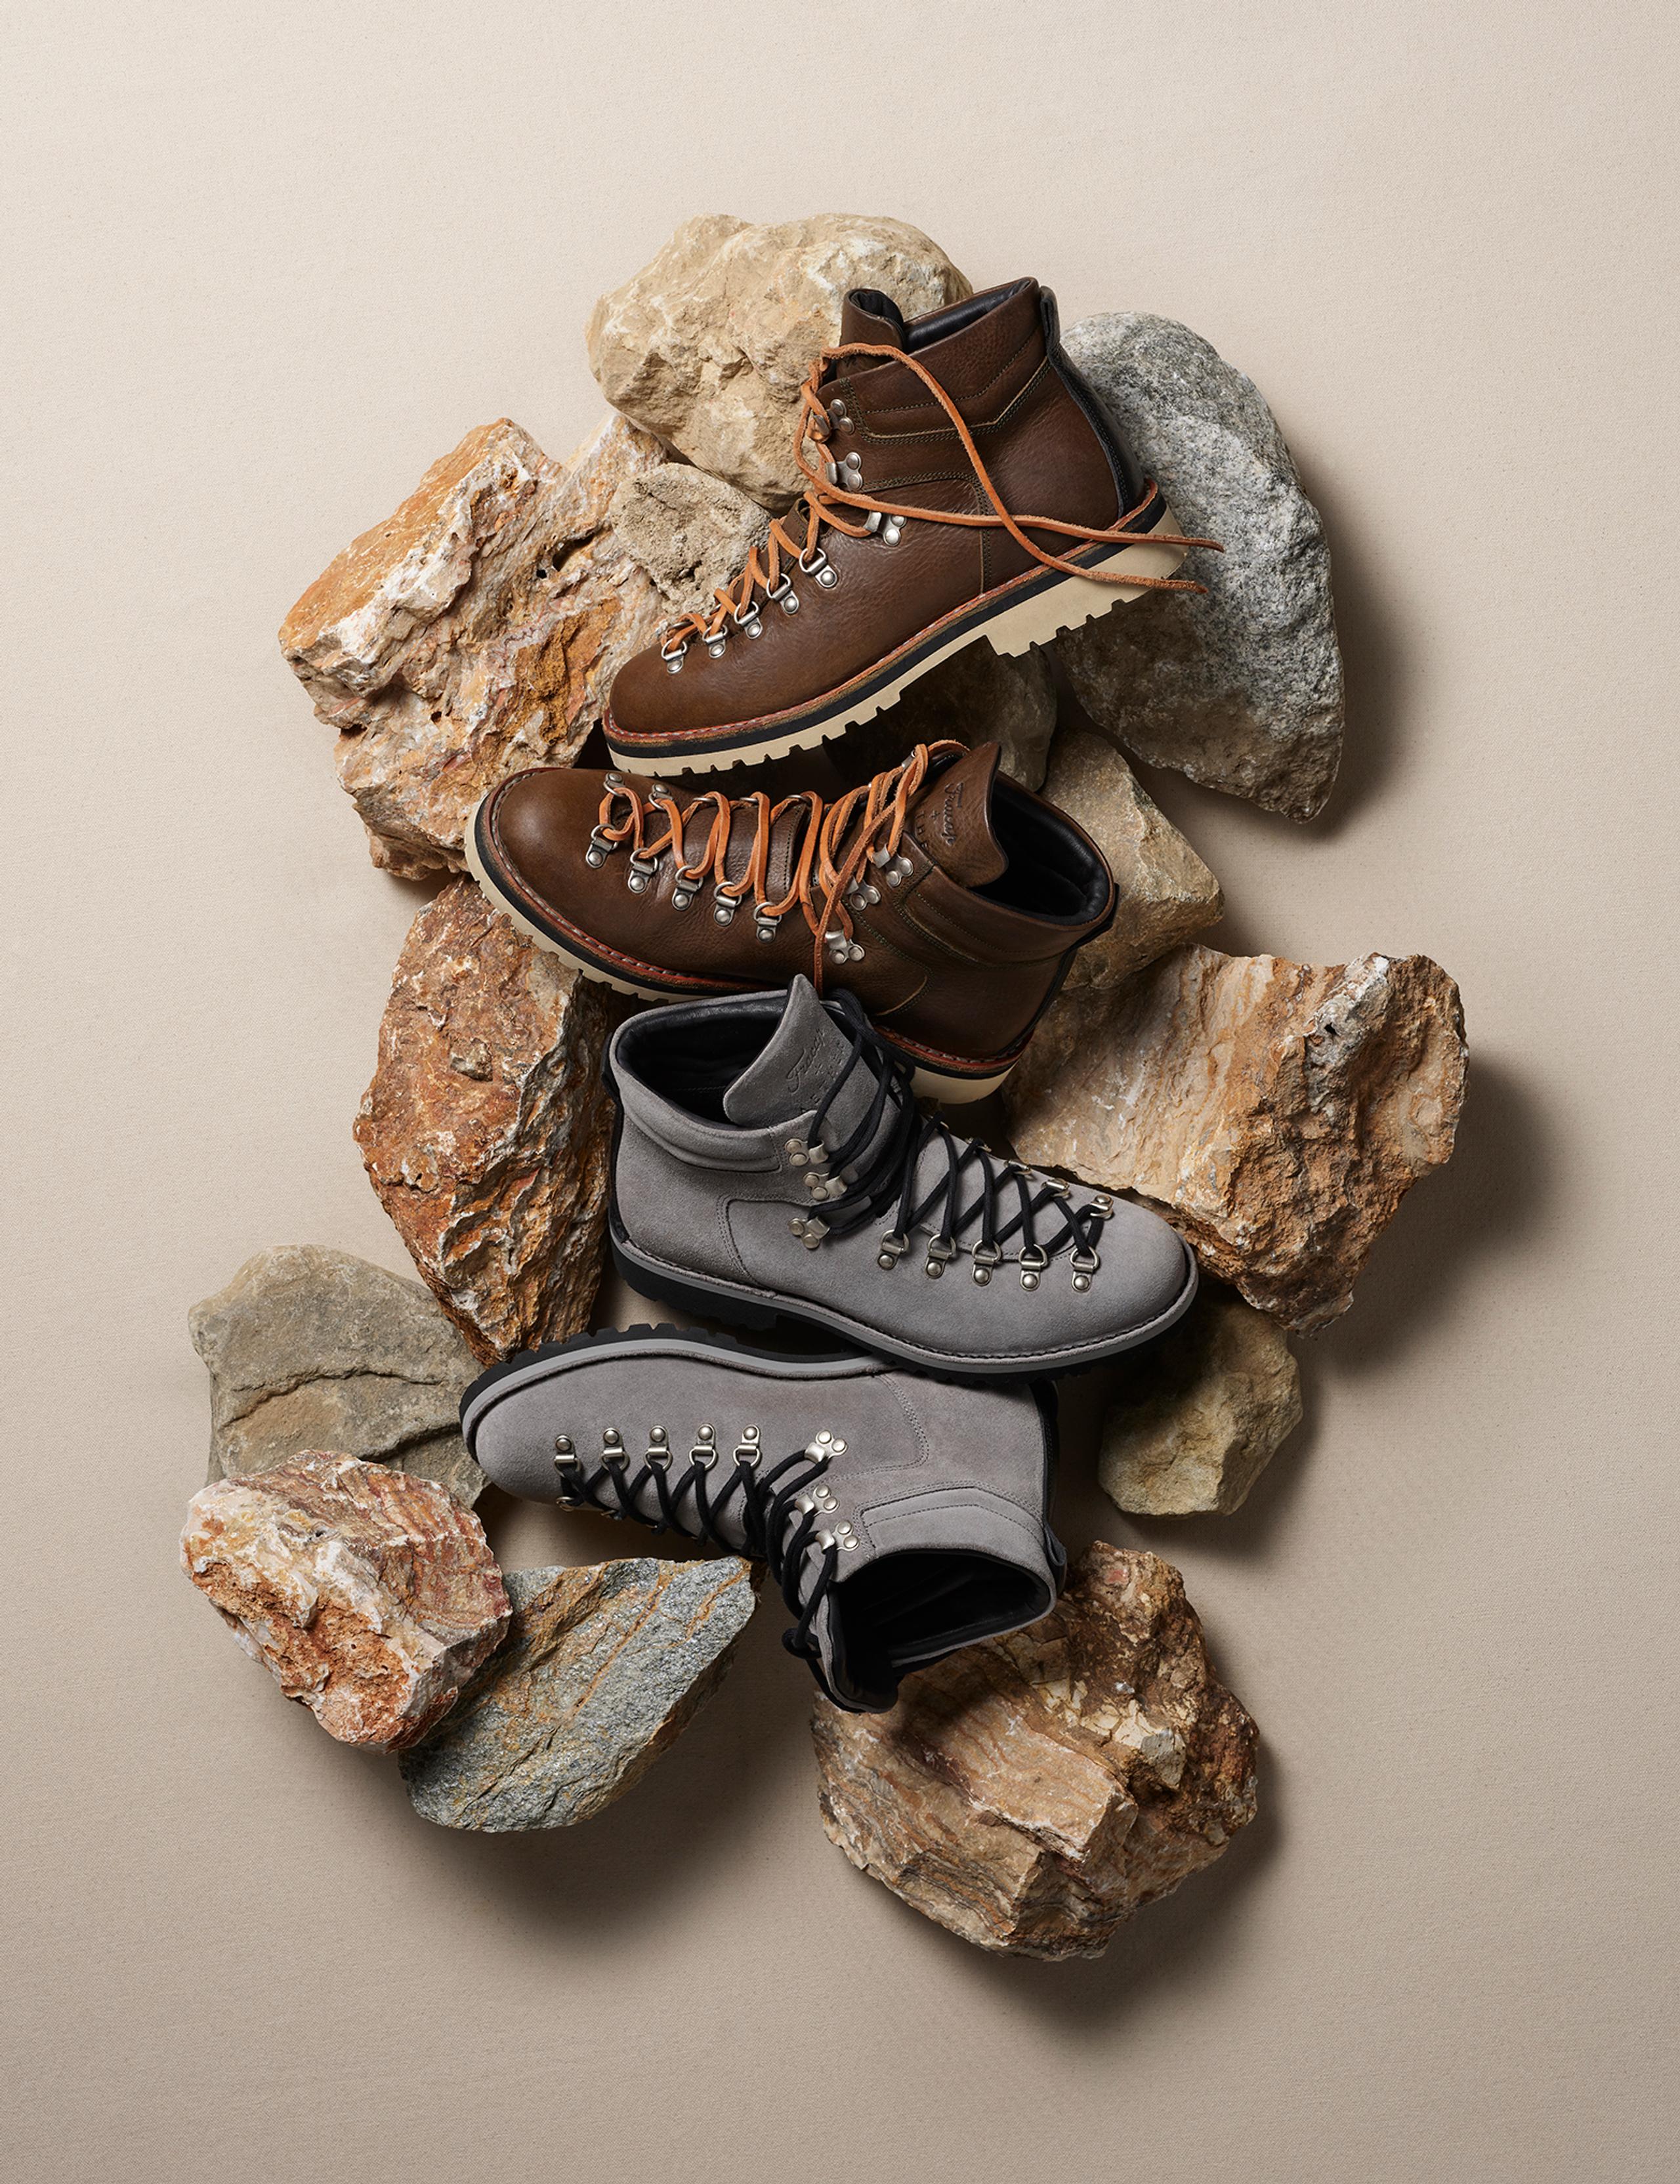 Men's Dolomite Boots arranged on top of collection of coastal sea rocks